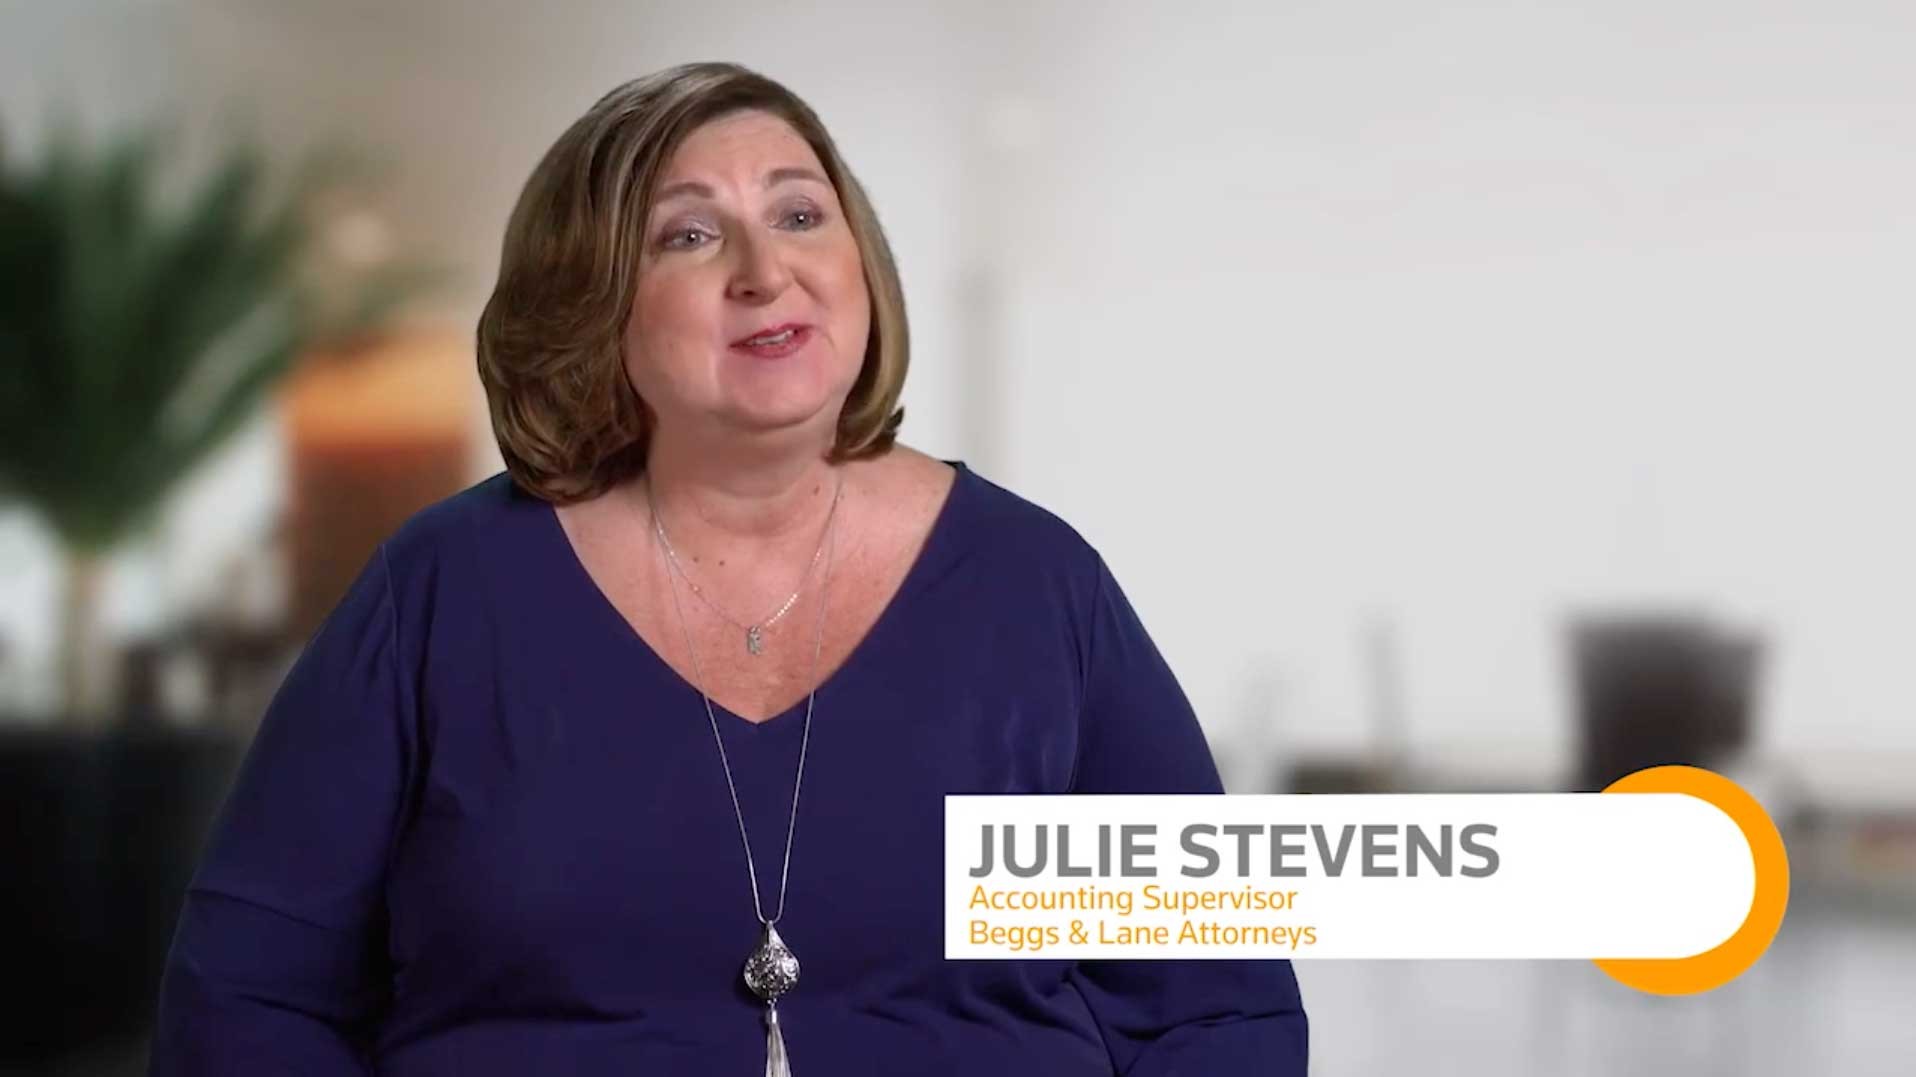 Julie Stevens talks about her law firm using ProLaw